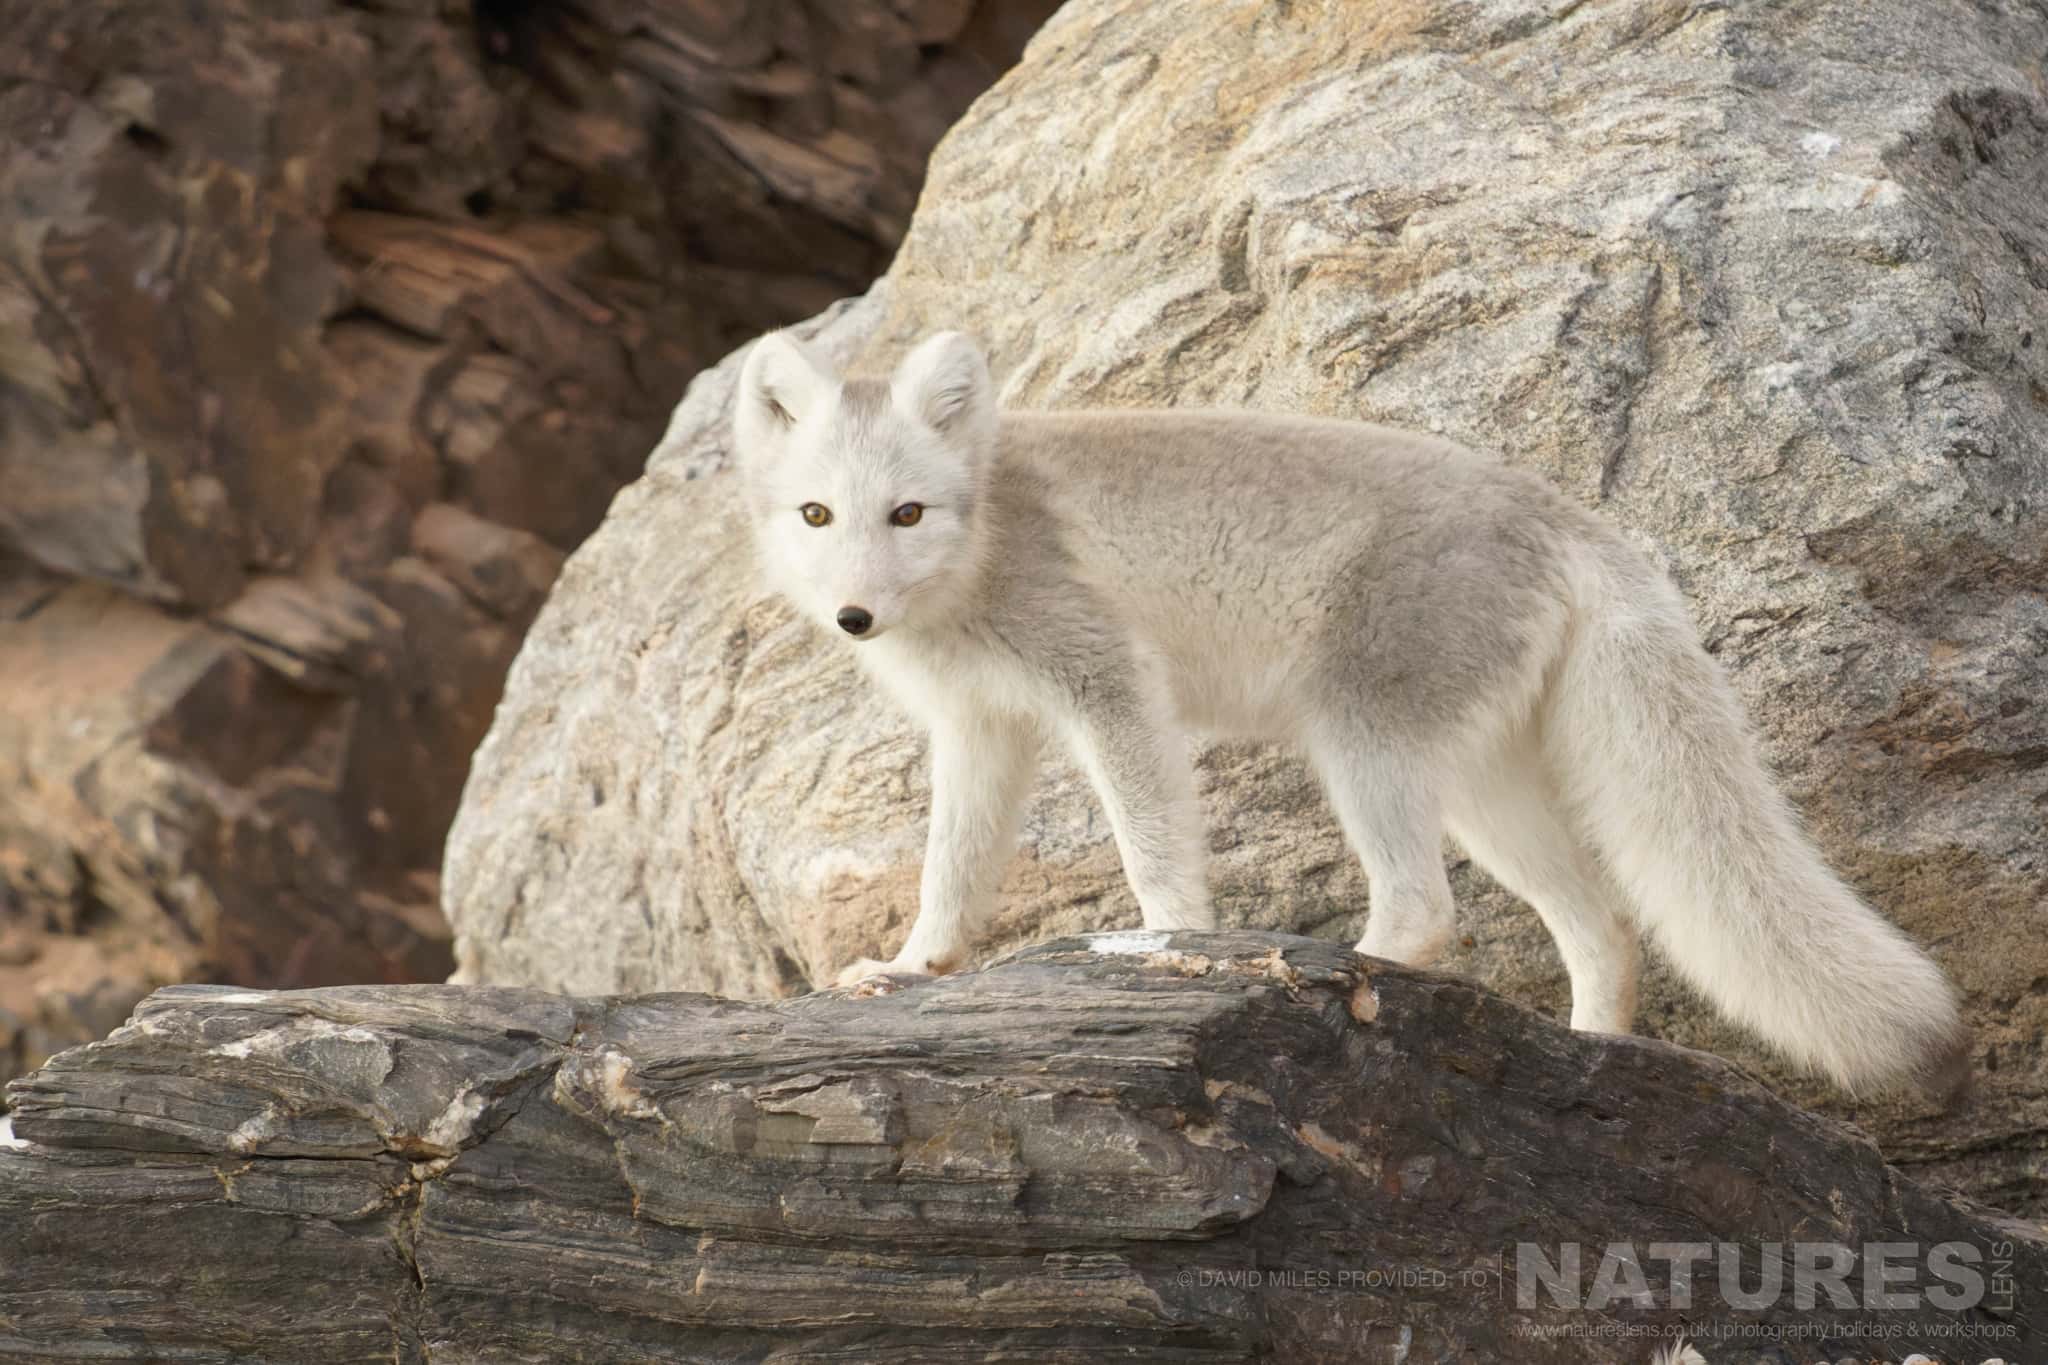 An Arctic Fox On A Rocky Beach Stares At The Photographer Typical Of The Kind Of Image We Hope You Will Capture During Our Polar Wildlife Of Svalbard Photography Holiday